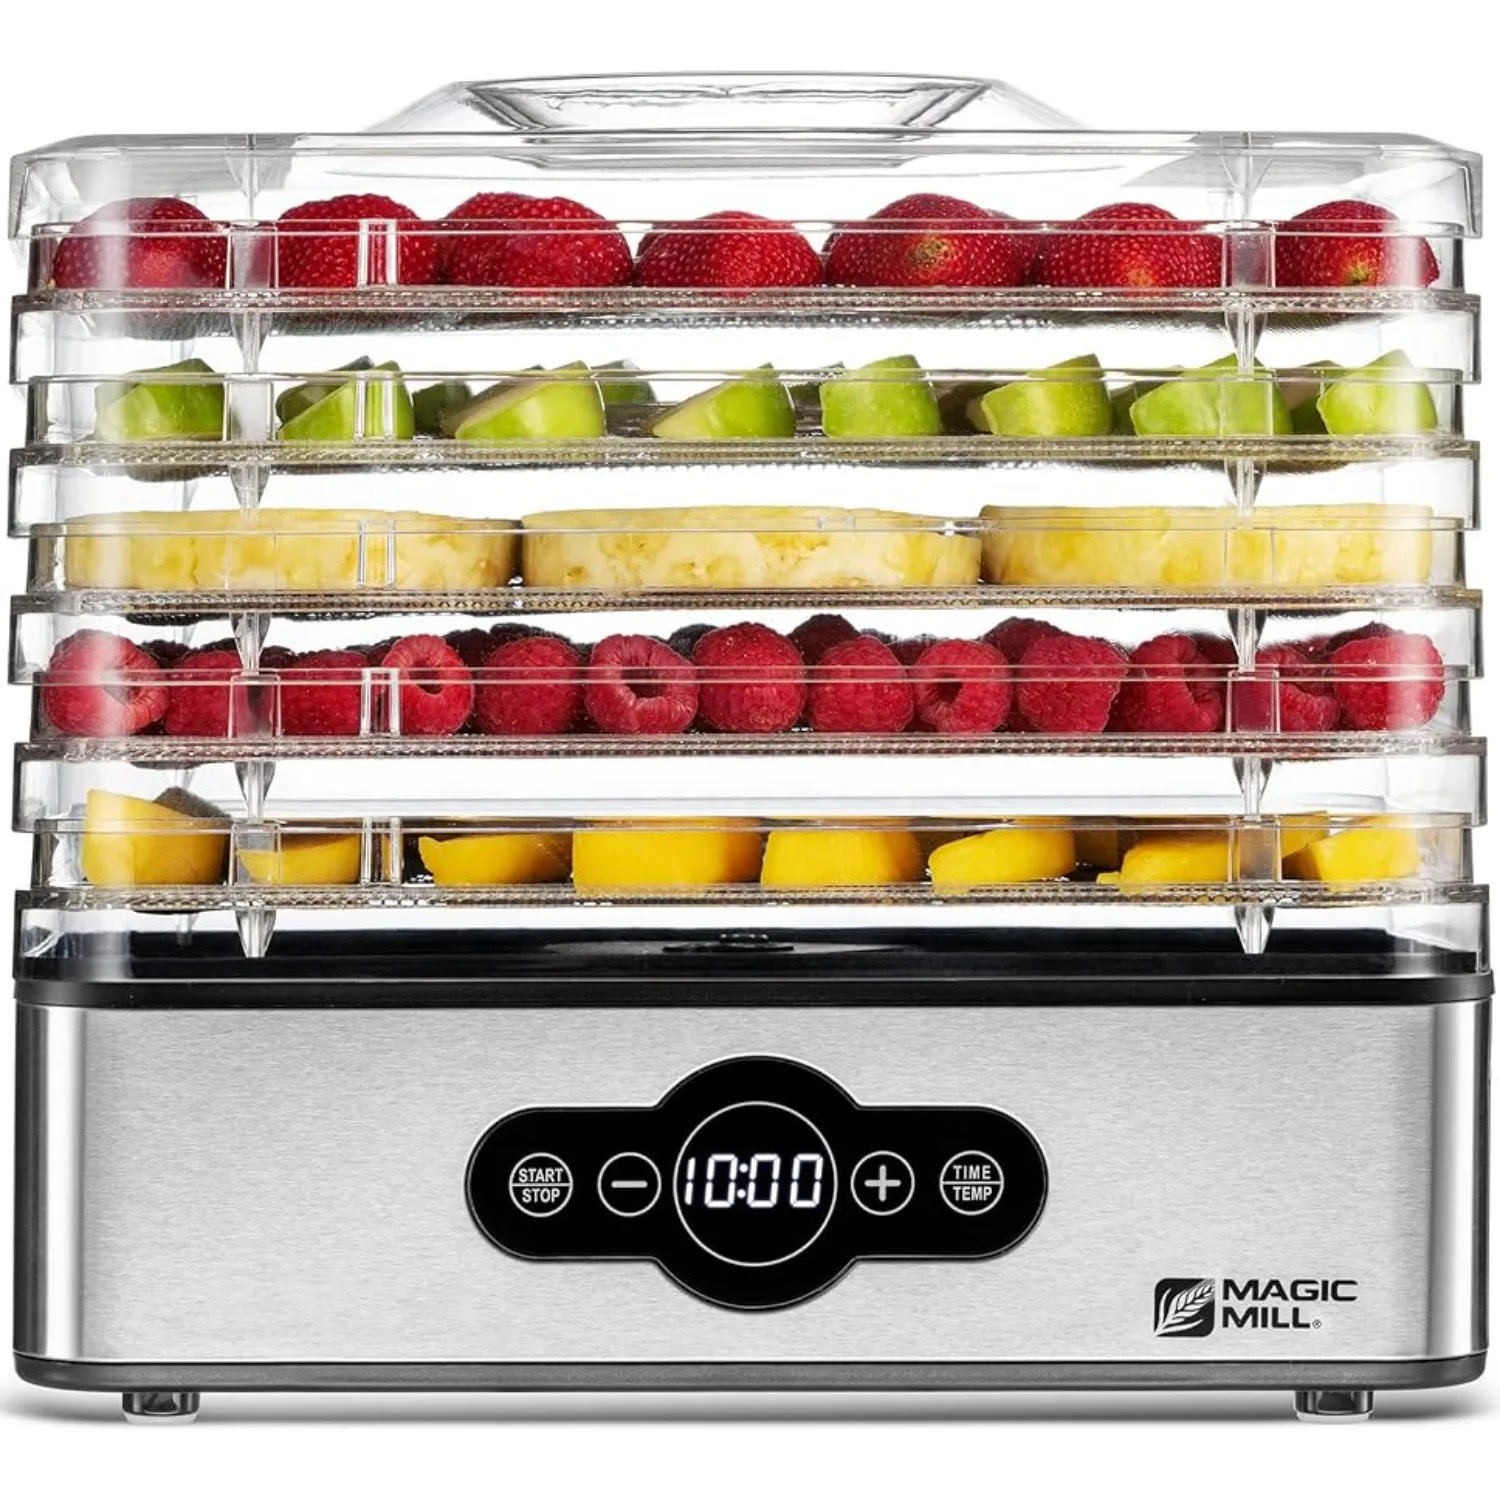 

Food Dehydrator Machine | 5 Stackable Stainless Steel Trays Jerky Dryer with Digital Adjustable Timer & Temperature Control